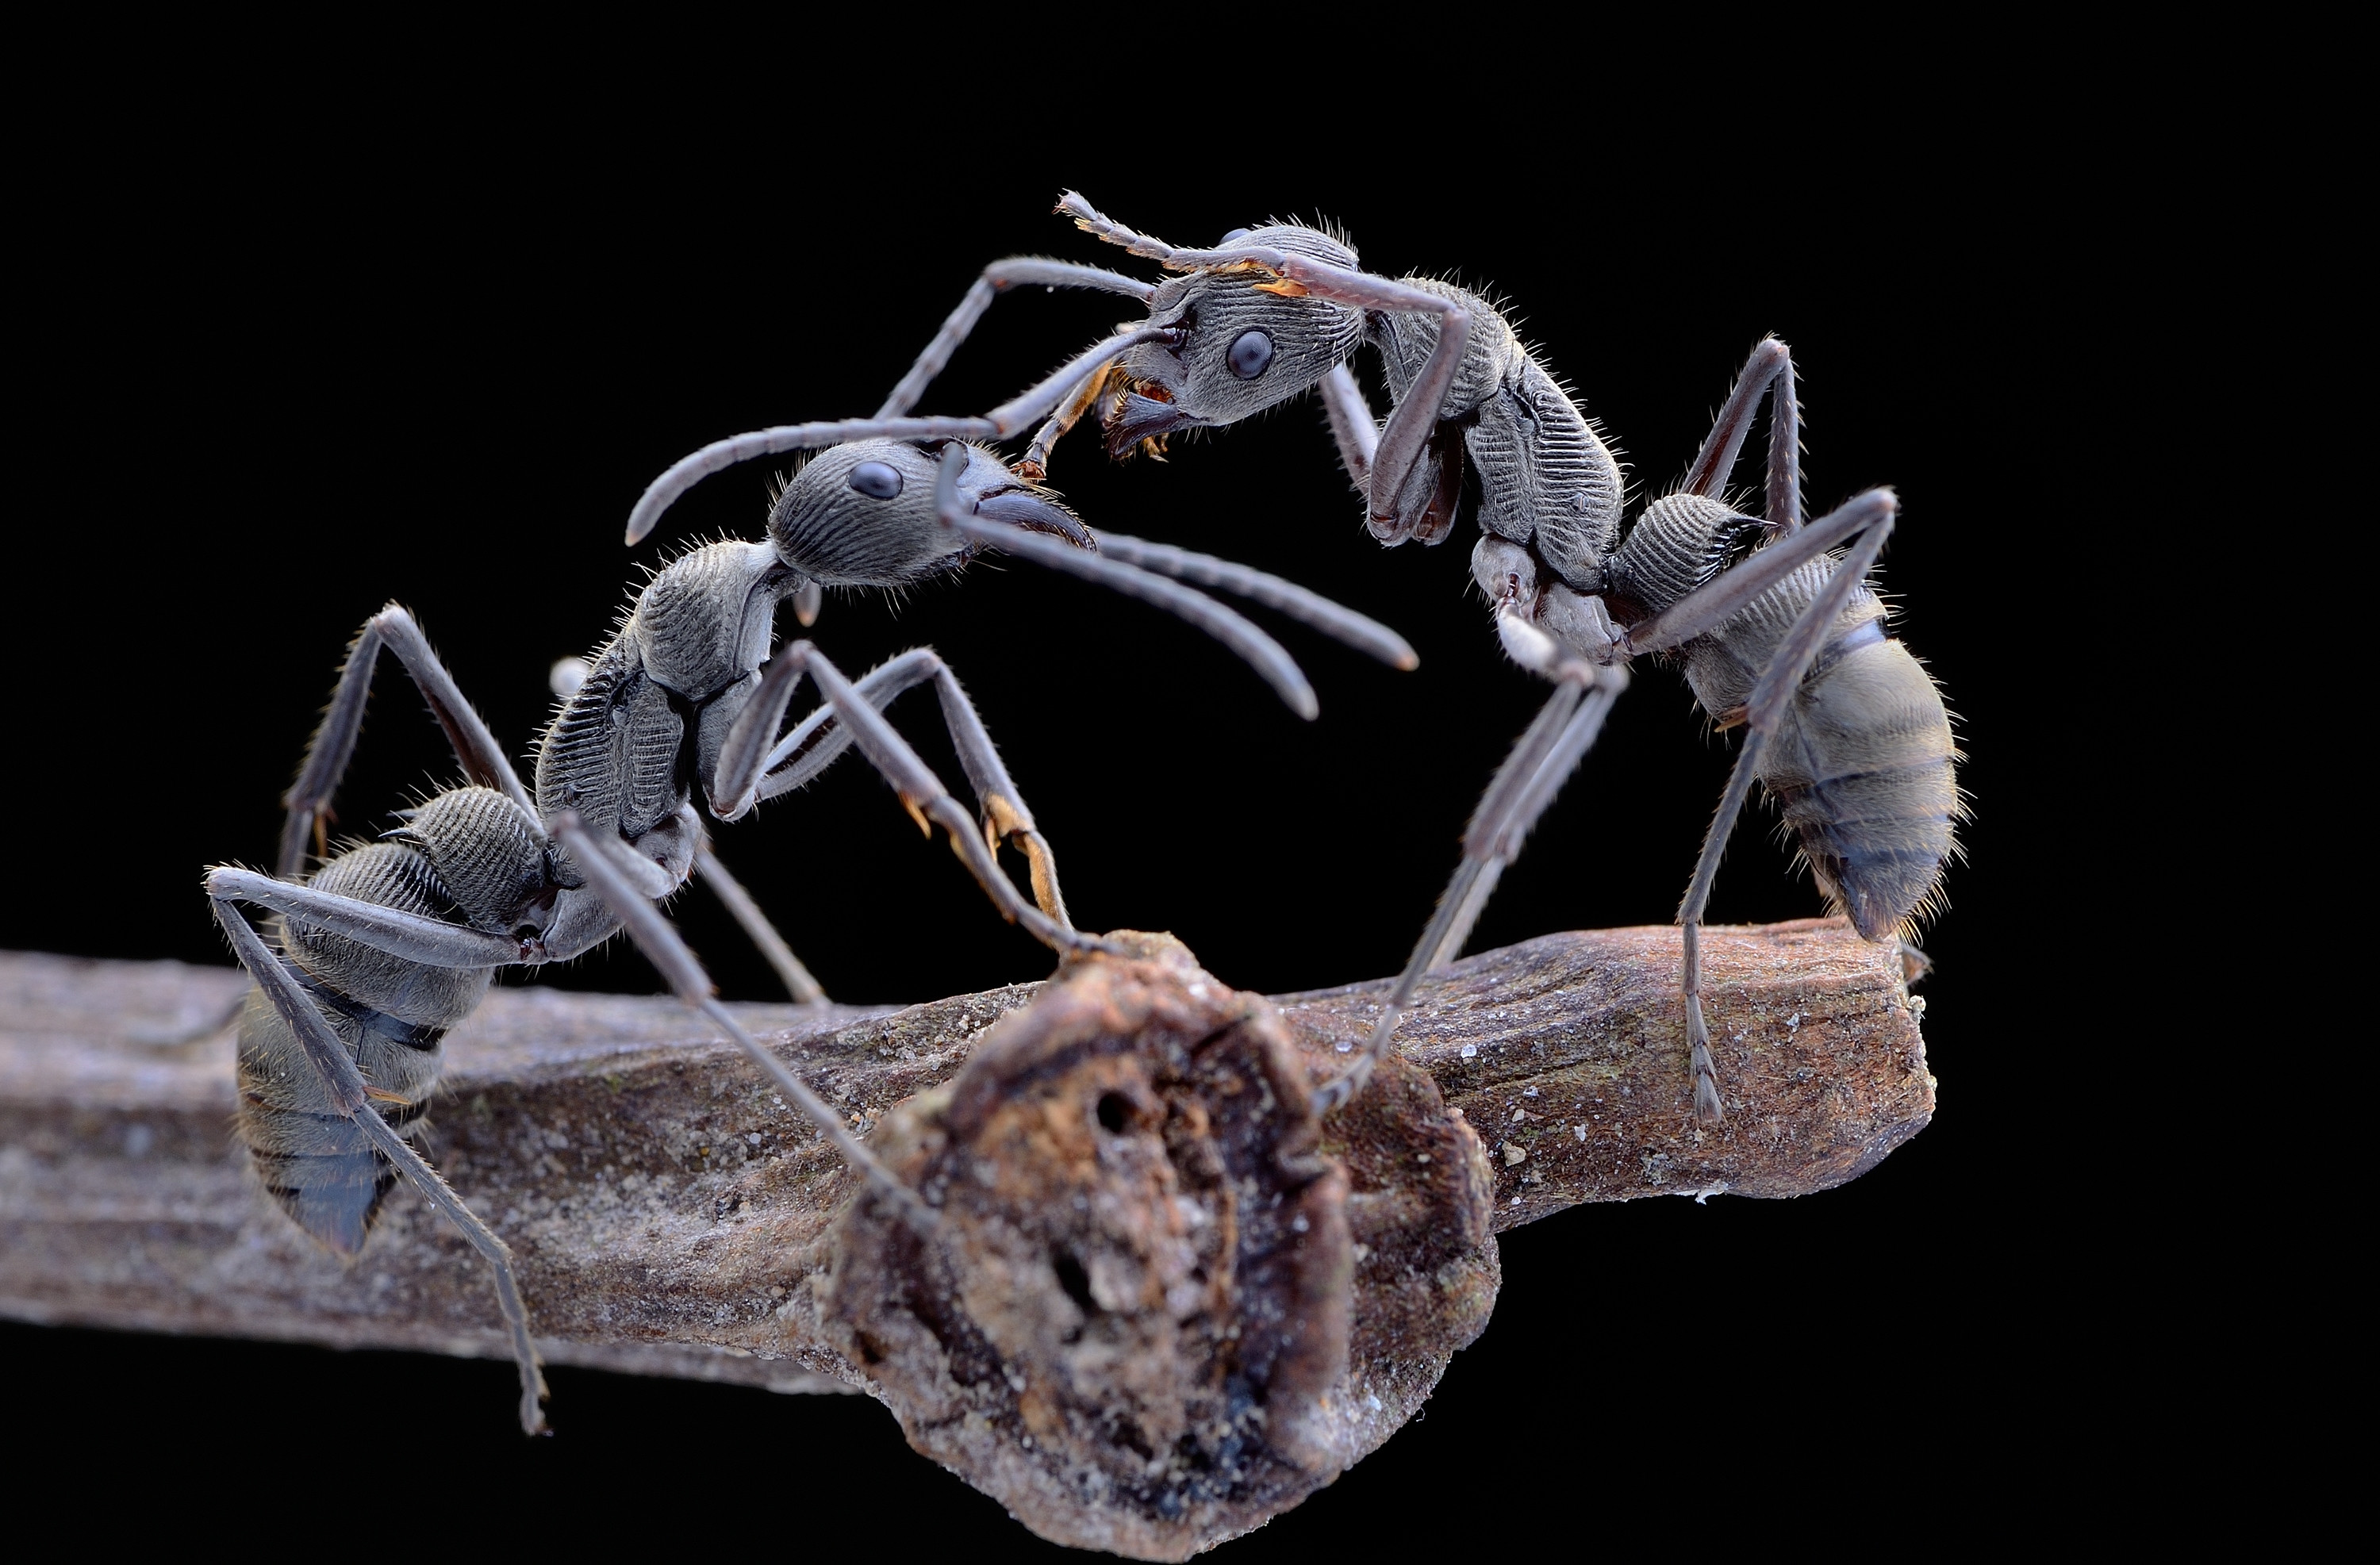 Wallpapers insect ants predatory insects on the desktop